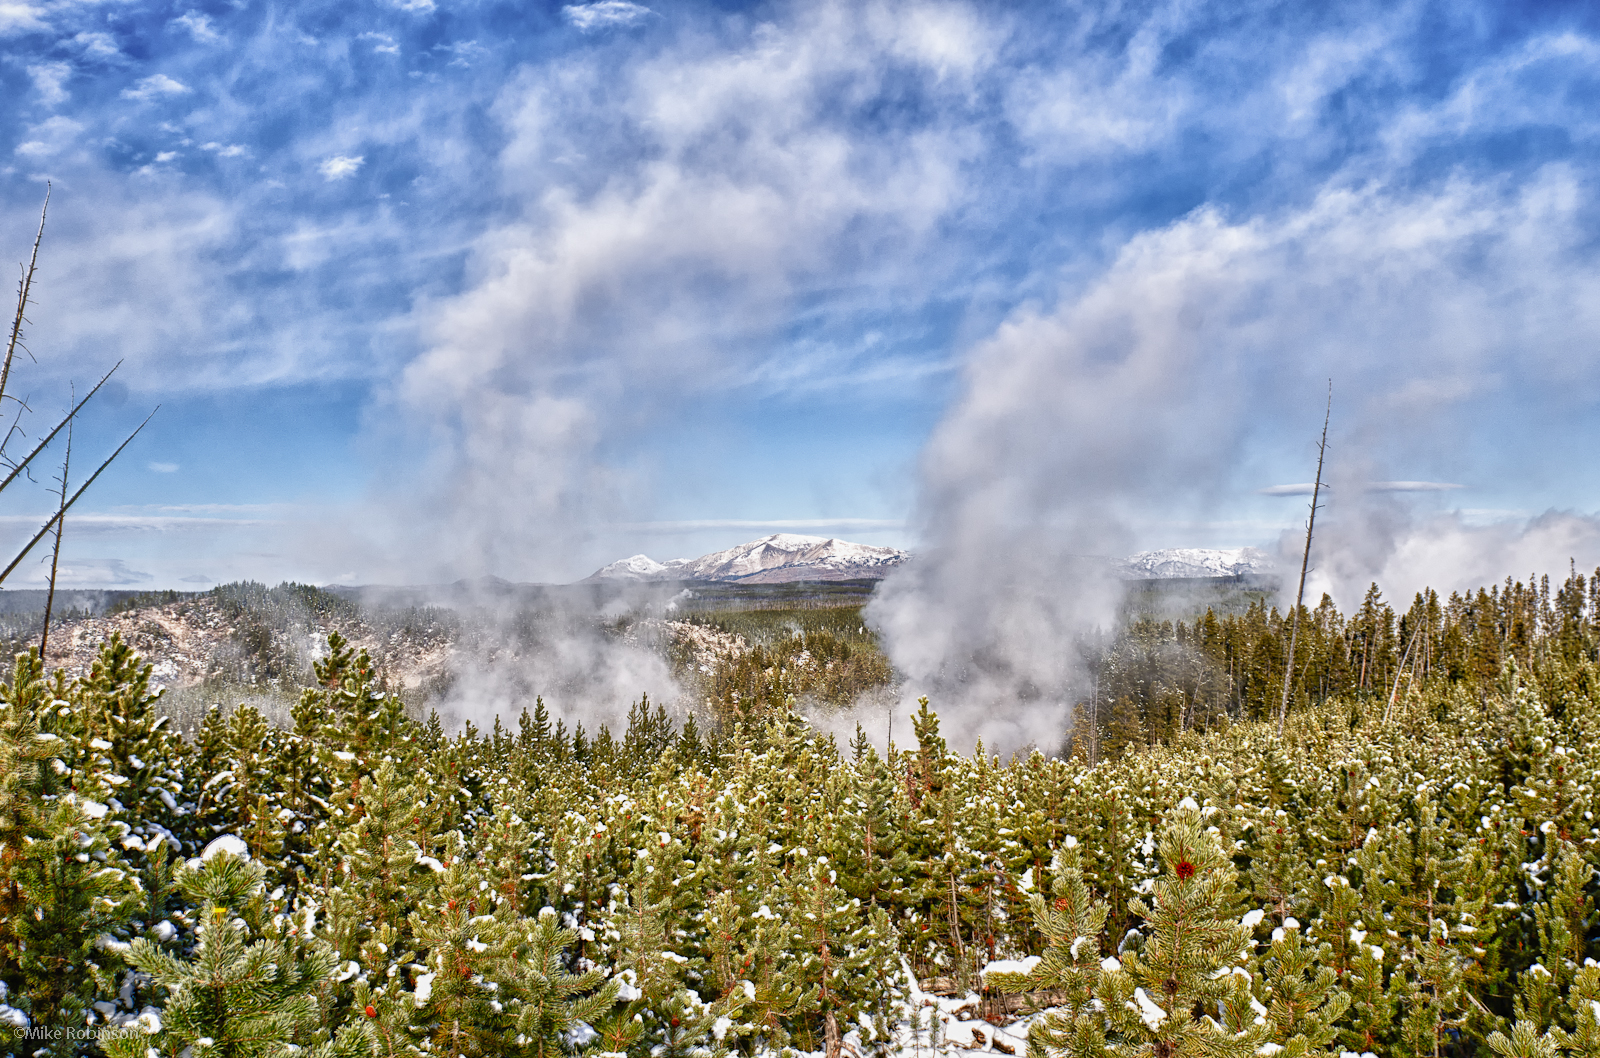 ... around 20 degrees, watching steam rise from the geysers and vents